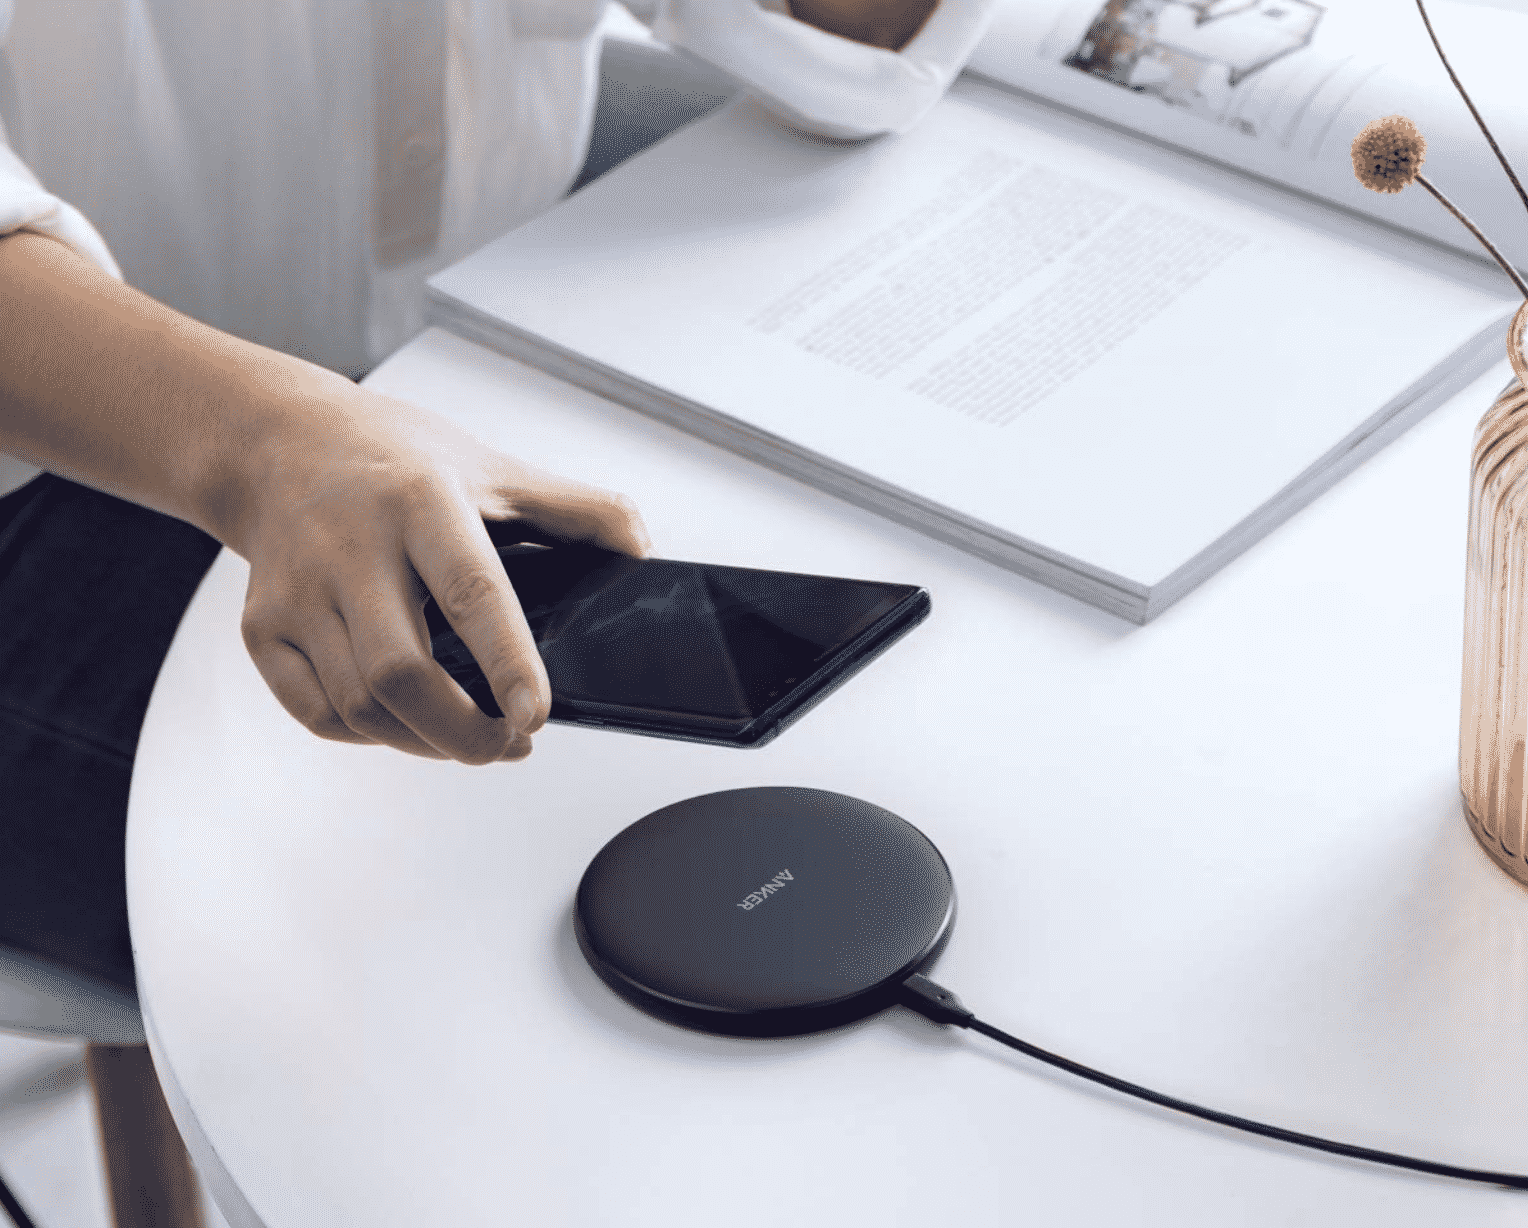 Get Anker's Wireless Qi Pad Charger for Less Than $10